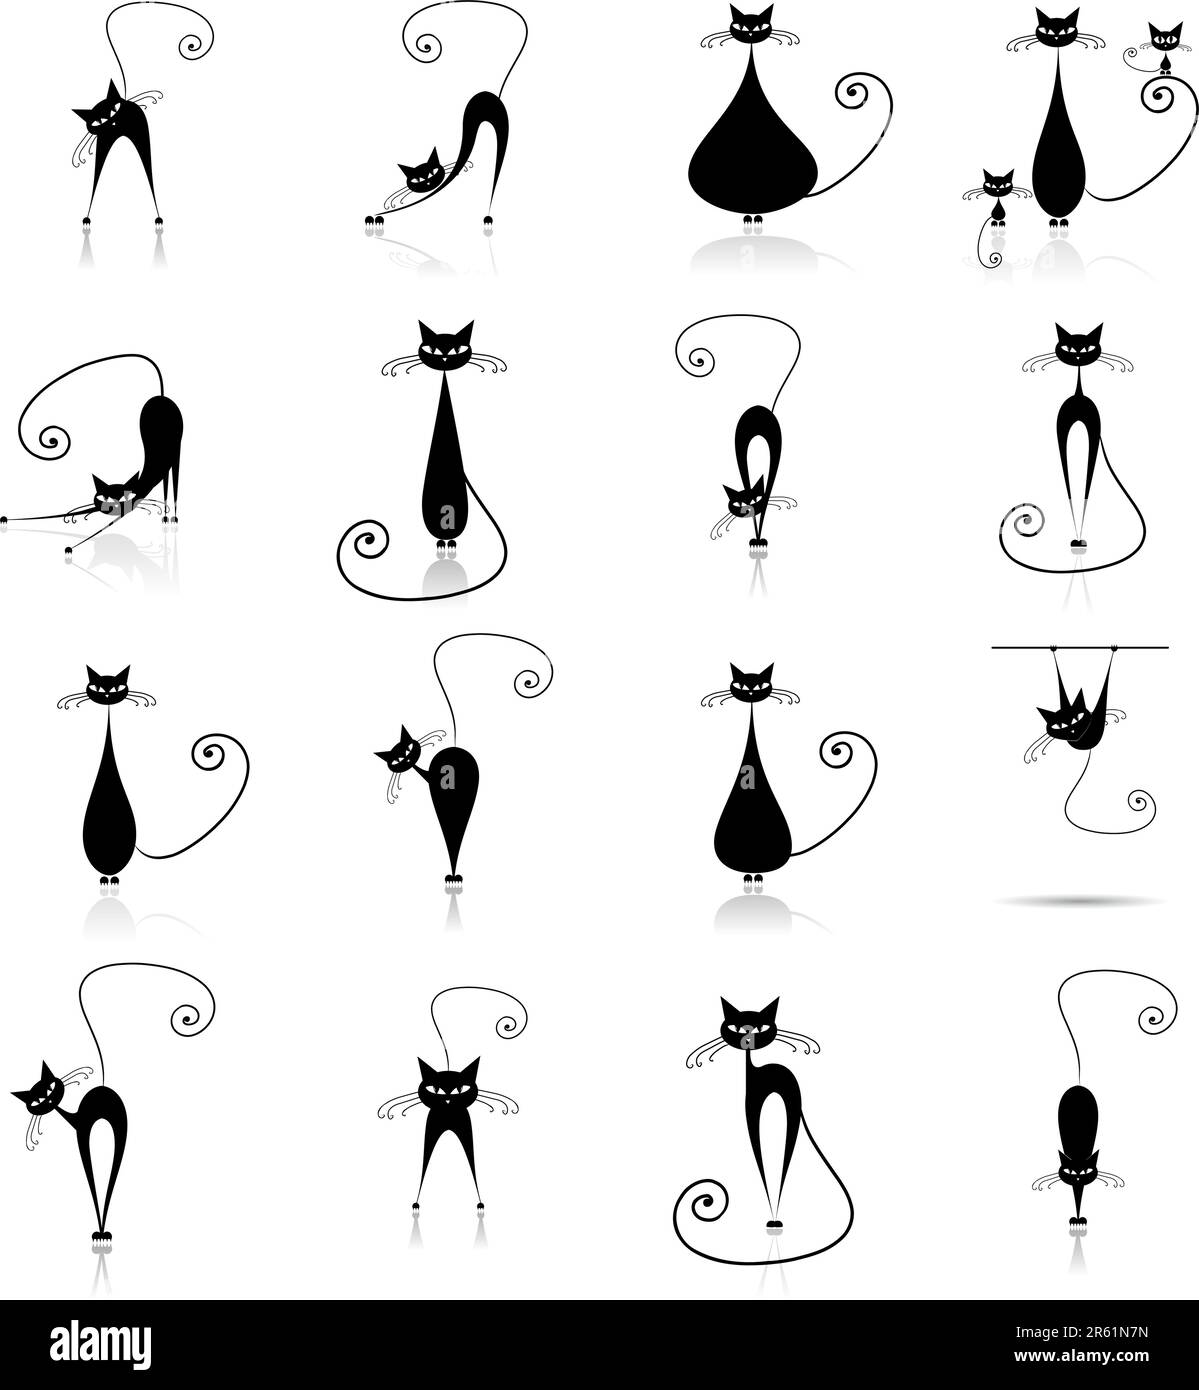 Black cat silhouette collections Stock Vector